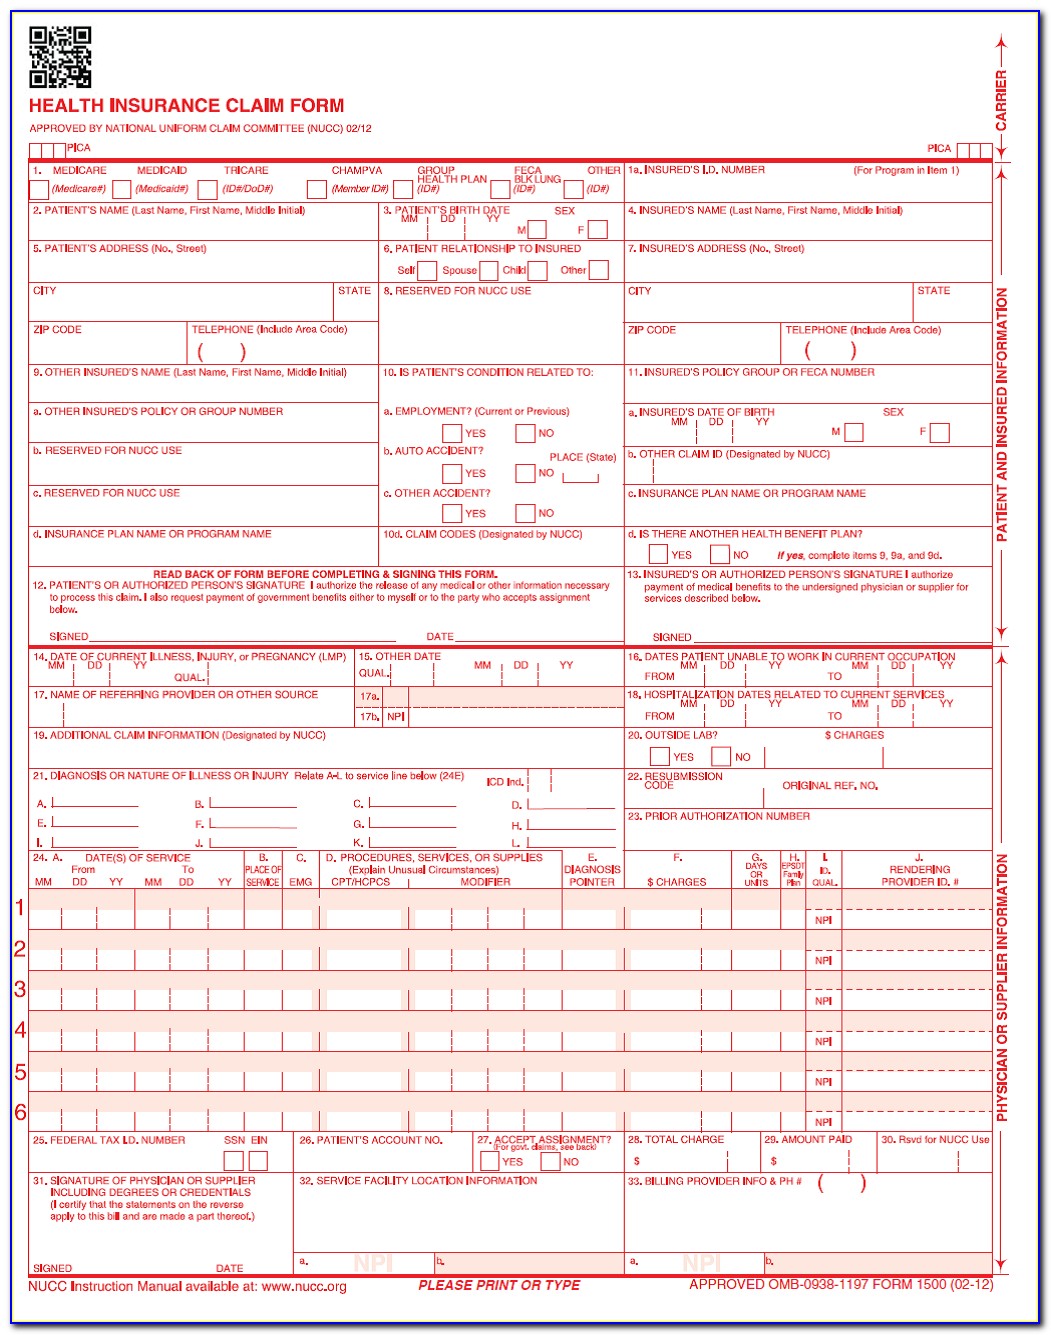 Cms 1500 Form Sample Completed